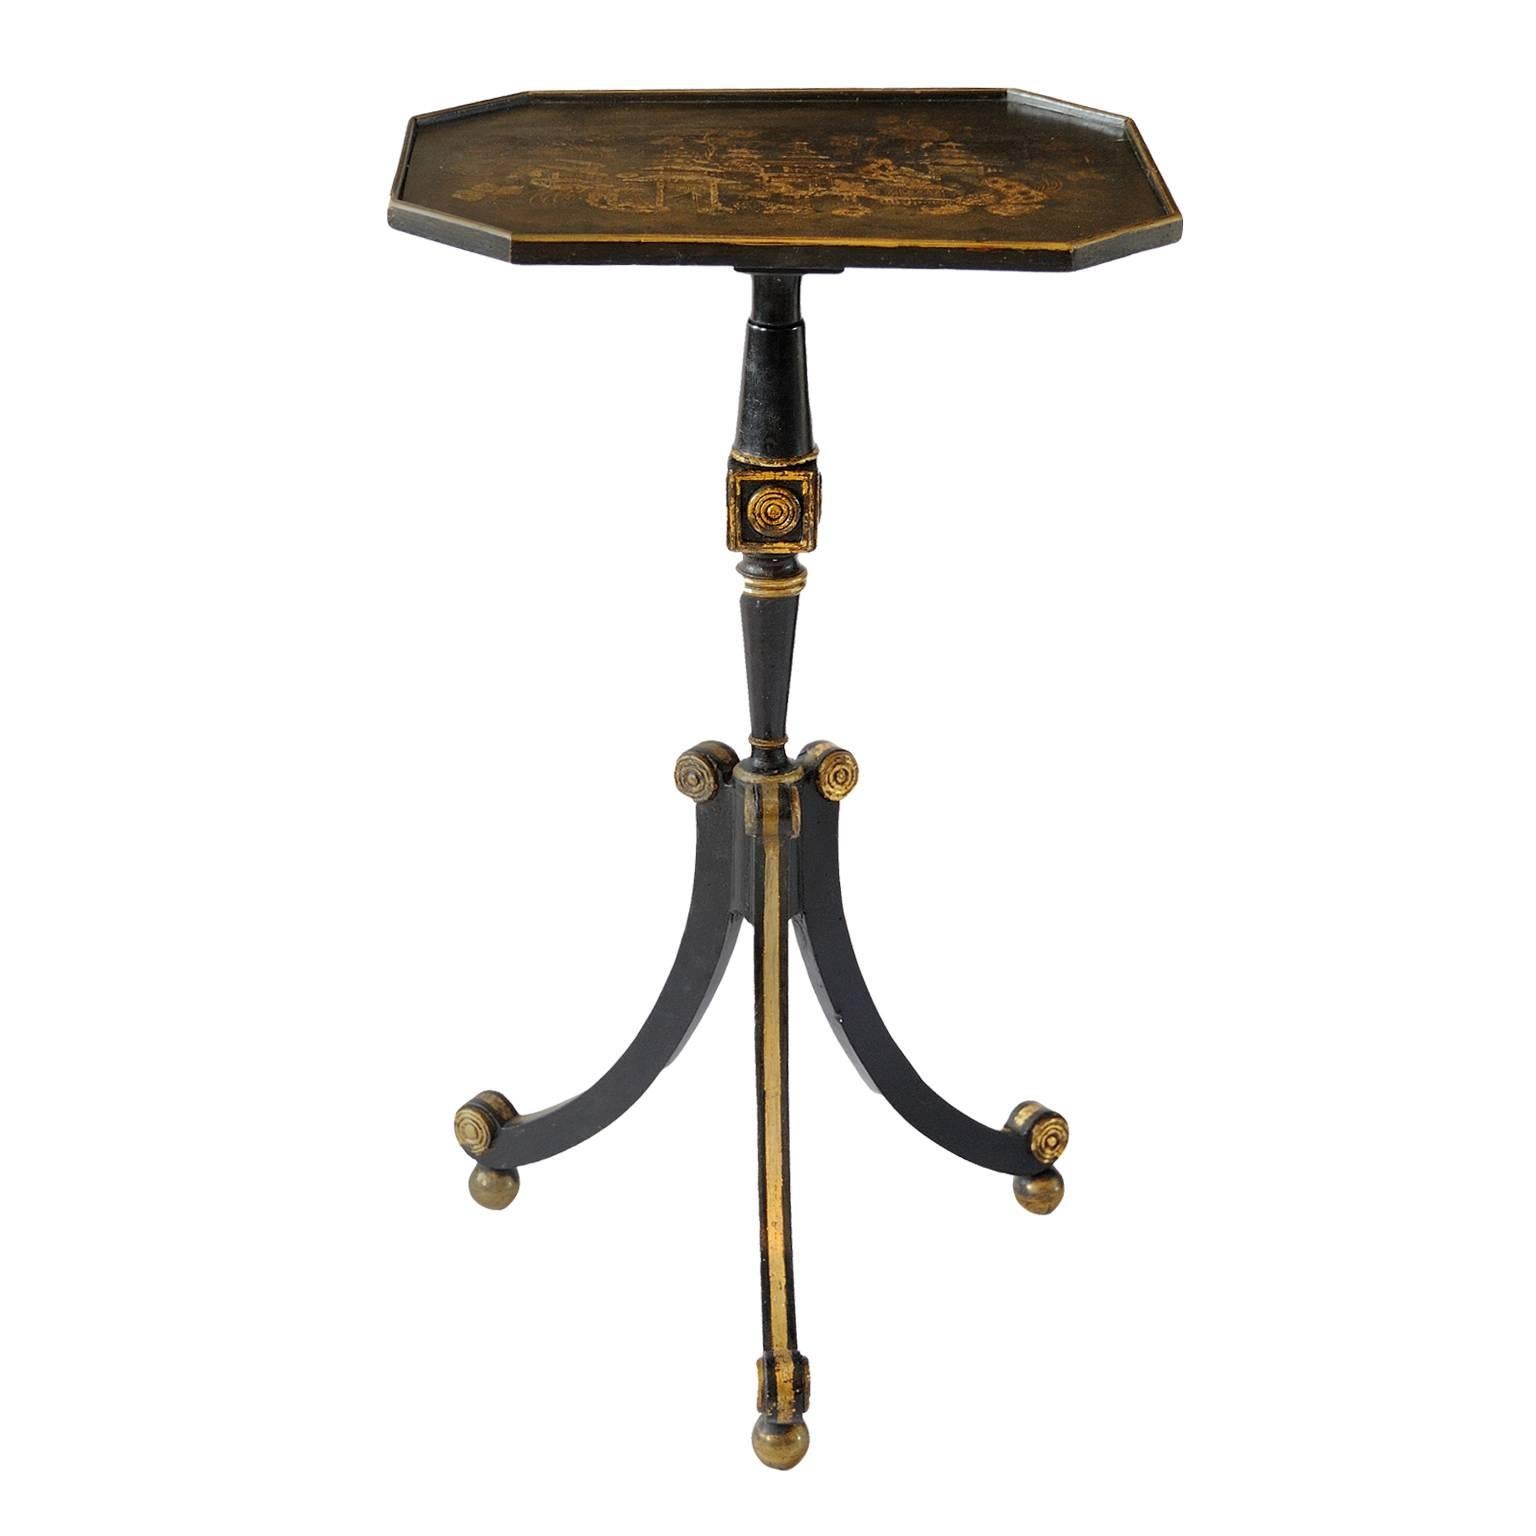 English Regency, Early 19th Century Lacquered Tripod Table, circa 1810 For Sale